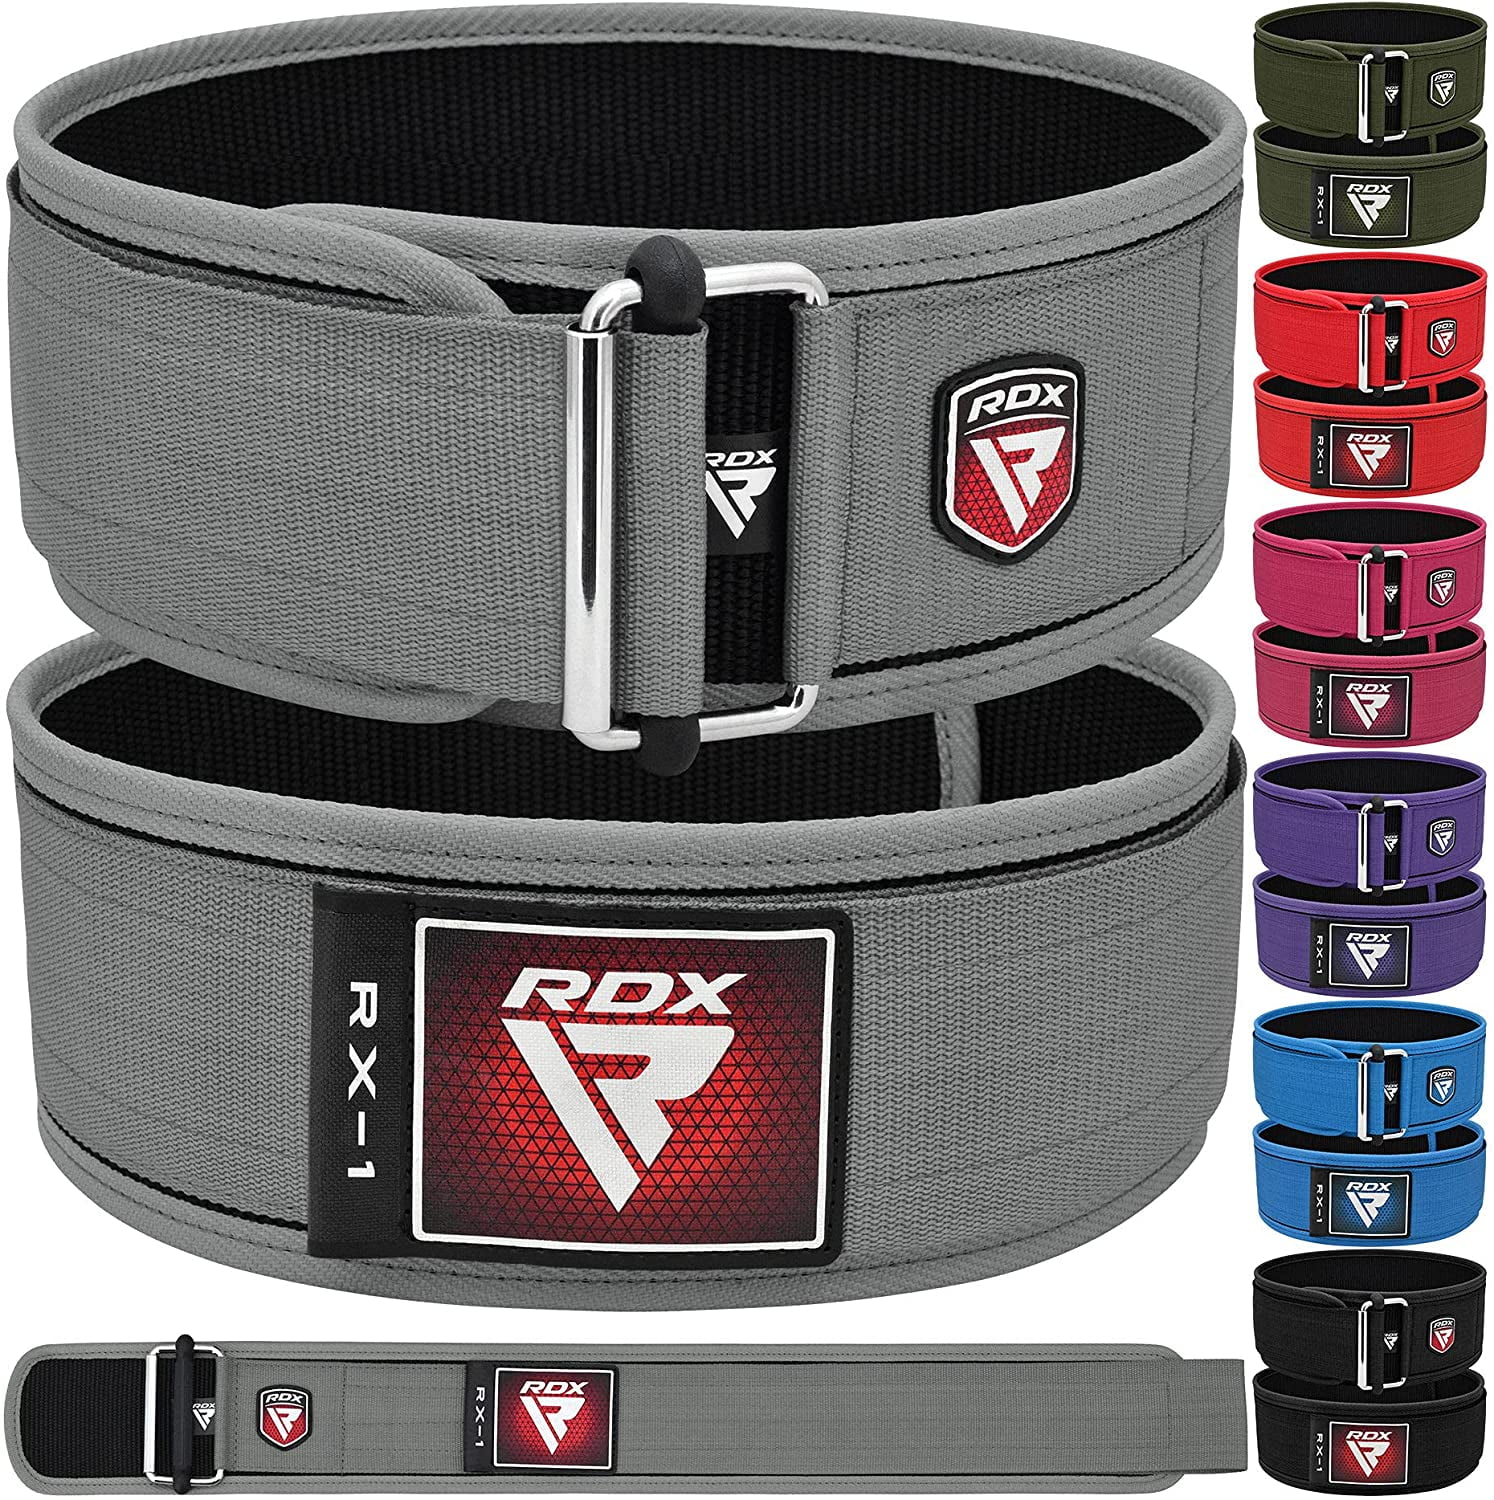 Details about   New Weight Lifting Leather Bodybuilding Powerlifting Fitness Gym & Training Belt 